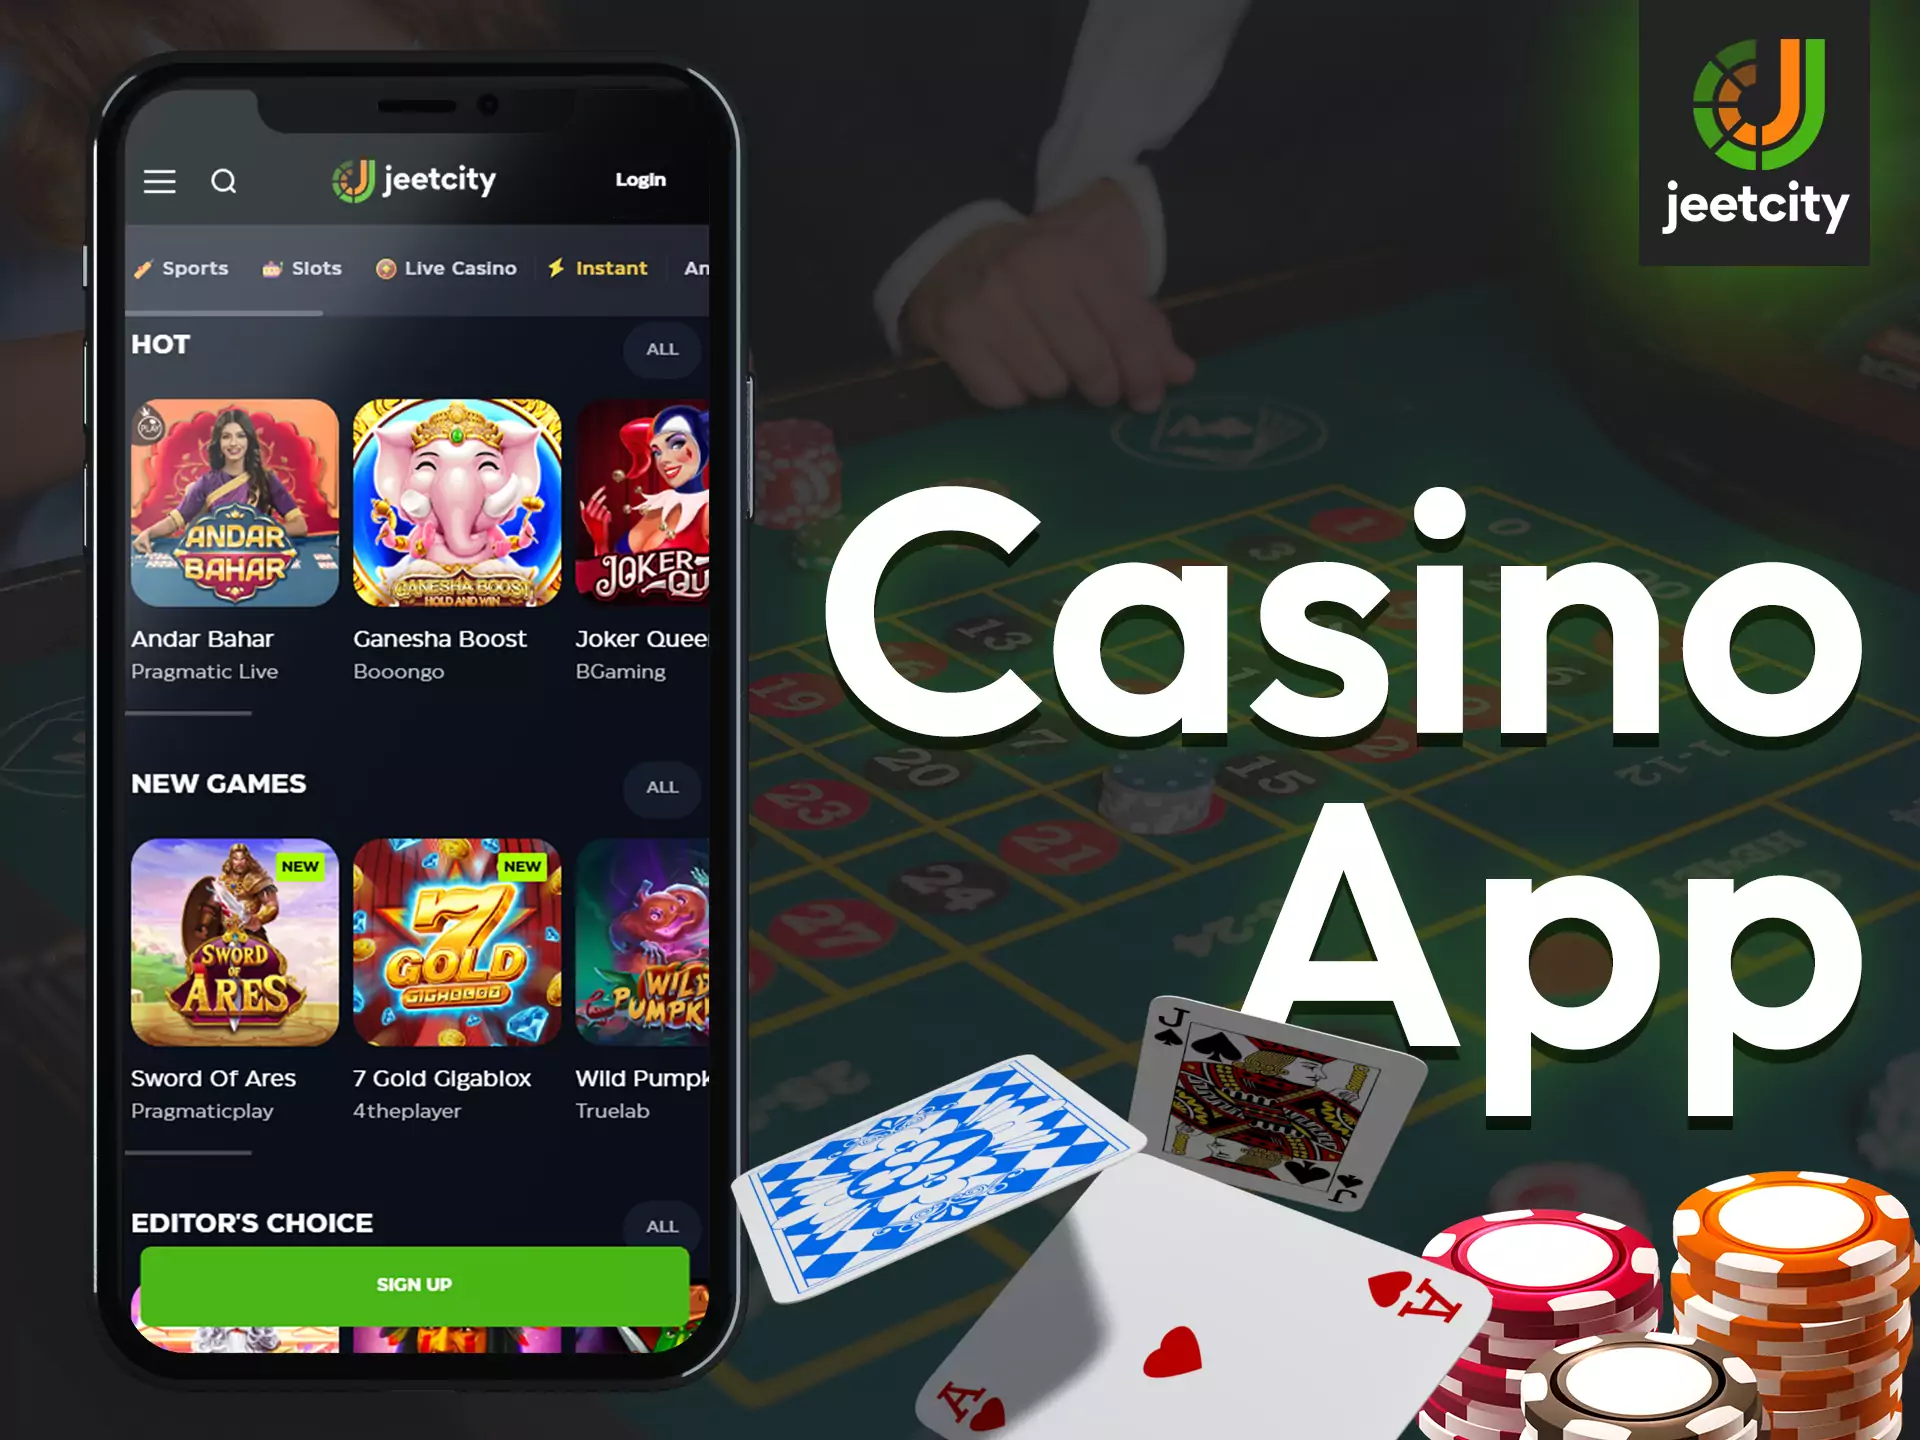 JeetCity casino app offer players many advantages and attractions.